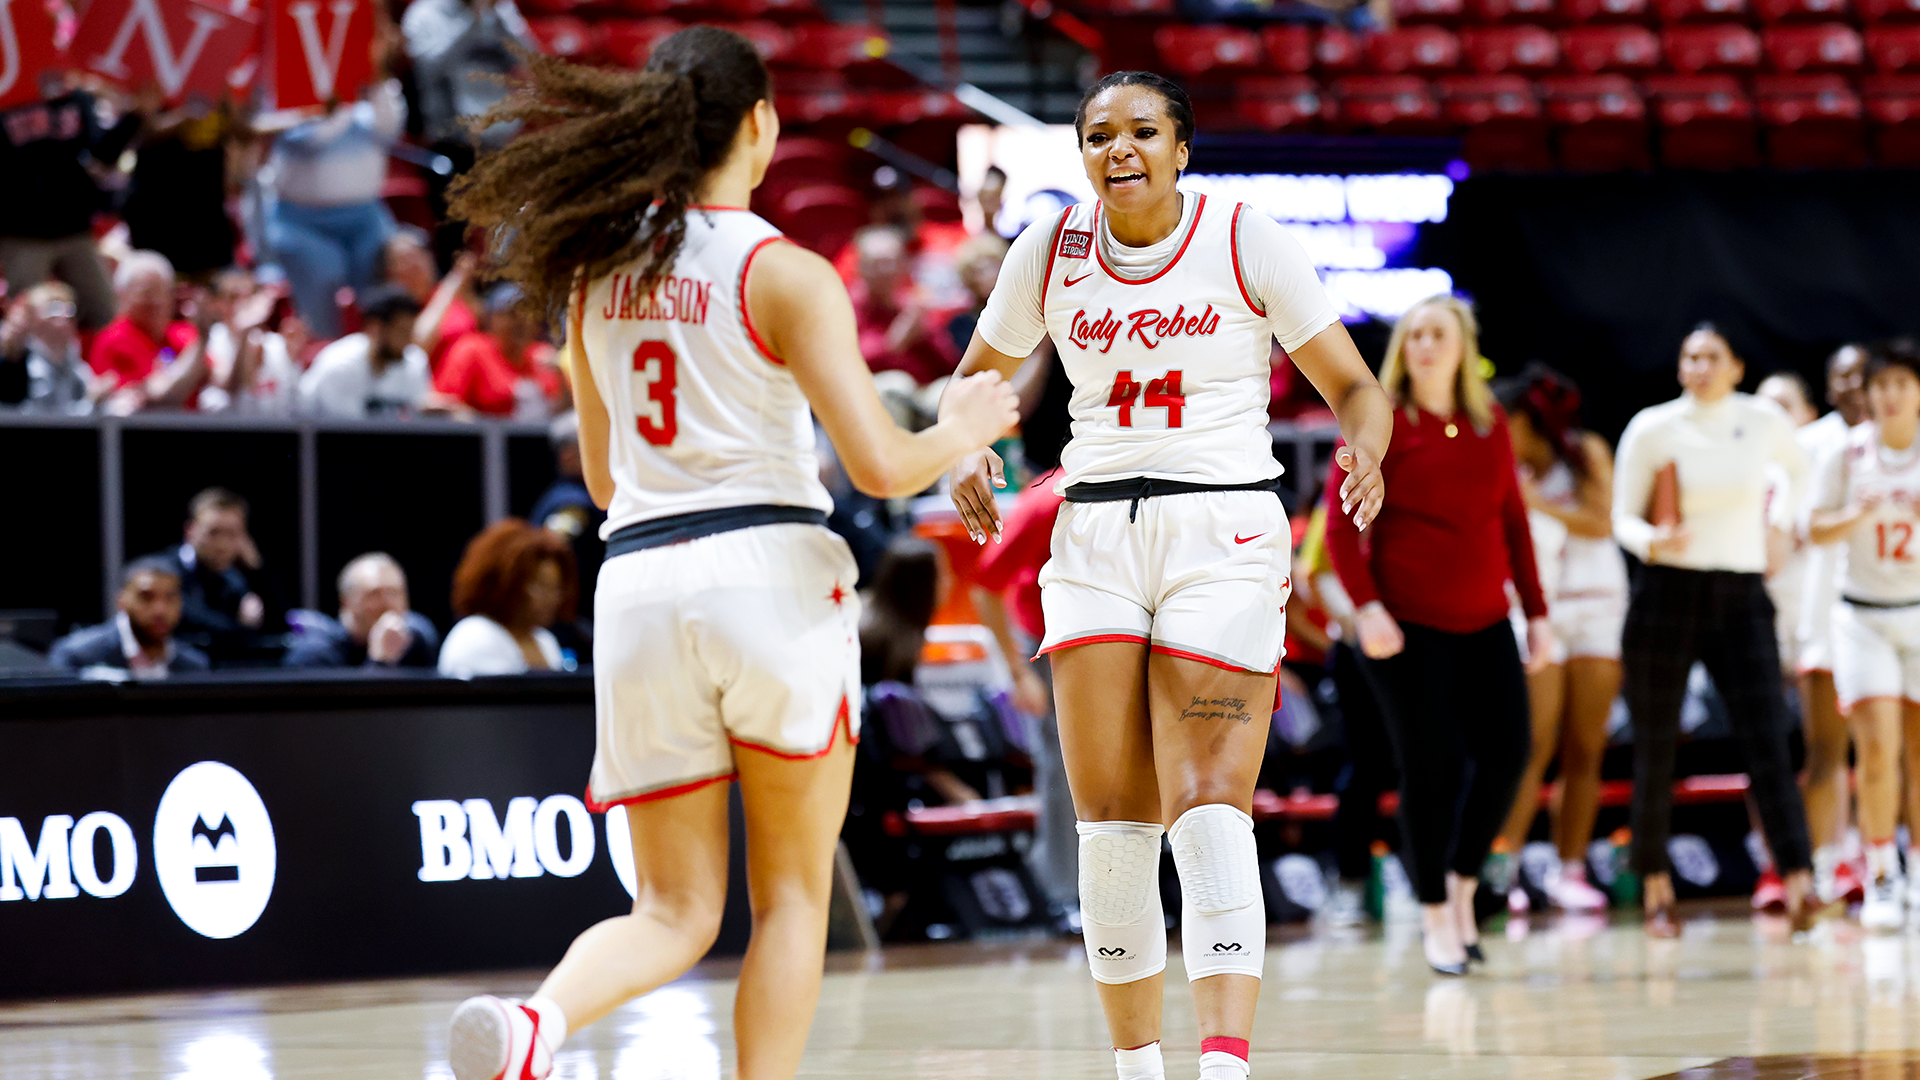 Top-Seeded UNLV Advances to Semifinals of MW Women's Basketball Championship